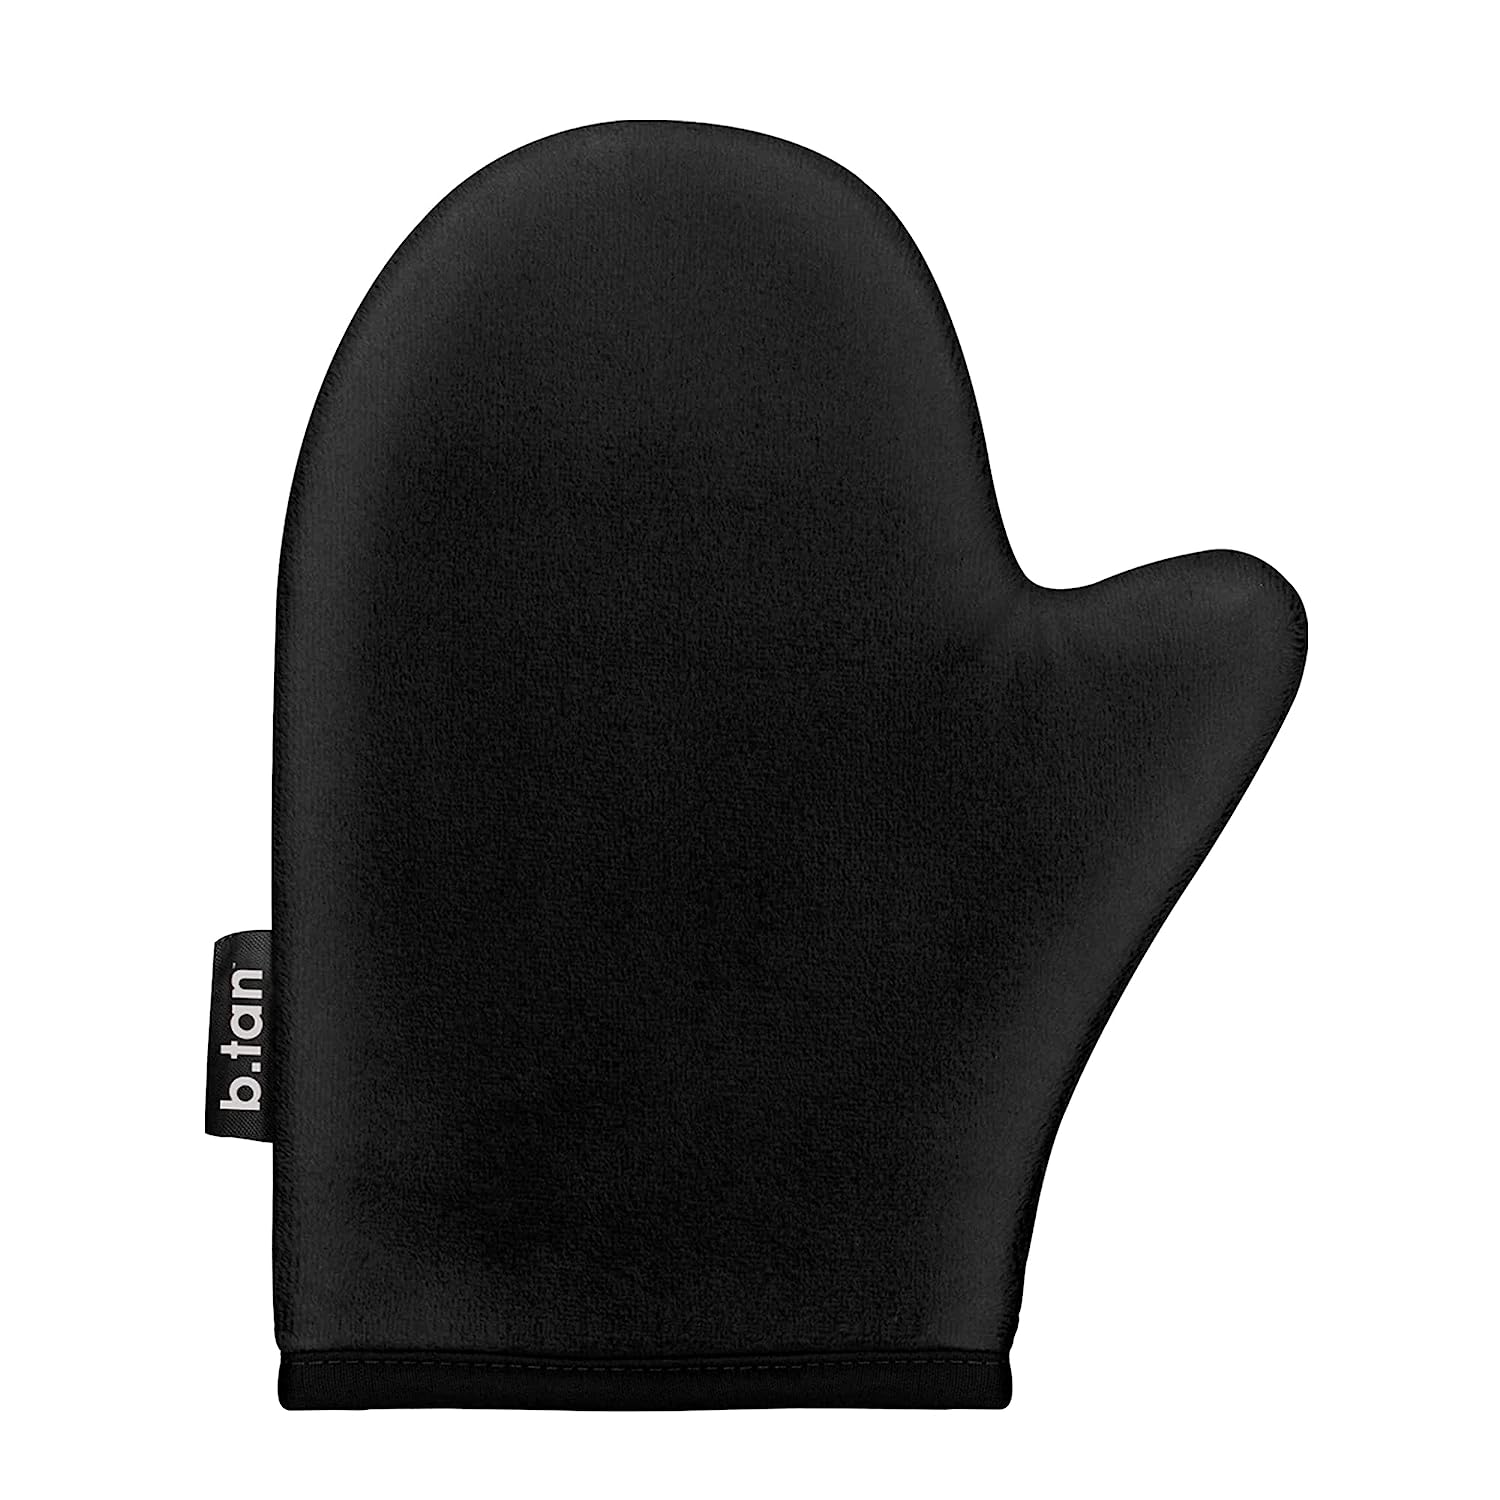 b.tan Body Self Tanning Mitt | I Don't Want Tan On My Hands - Self Tanning Applicator Glove with Thumb, Streak-Free, Even Application, Velvety Soft, Reusable, Sunless Tan, Body Lotion, Tanning Lotion - Clarissa Maxwell 